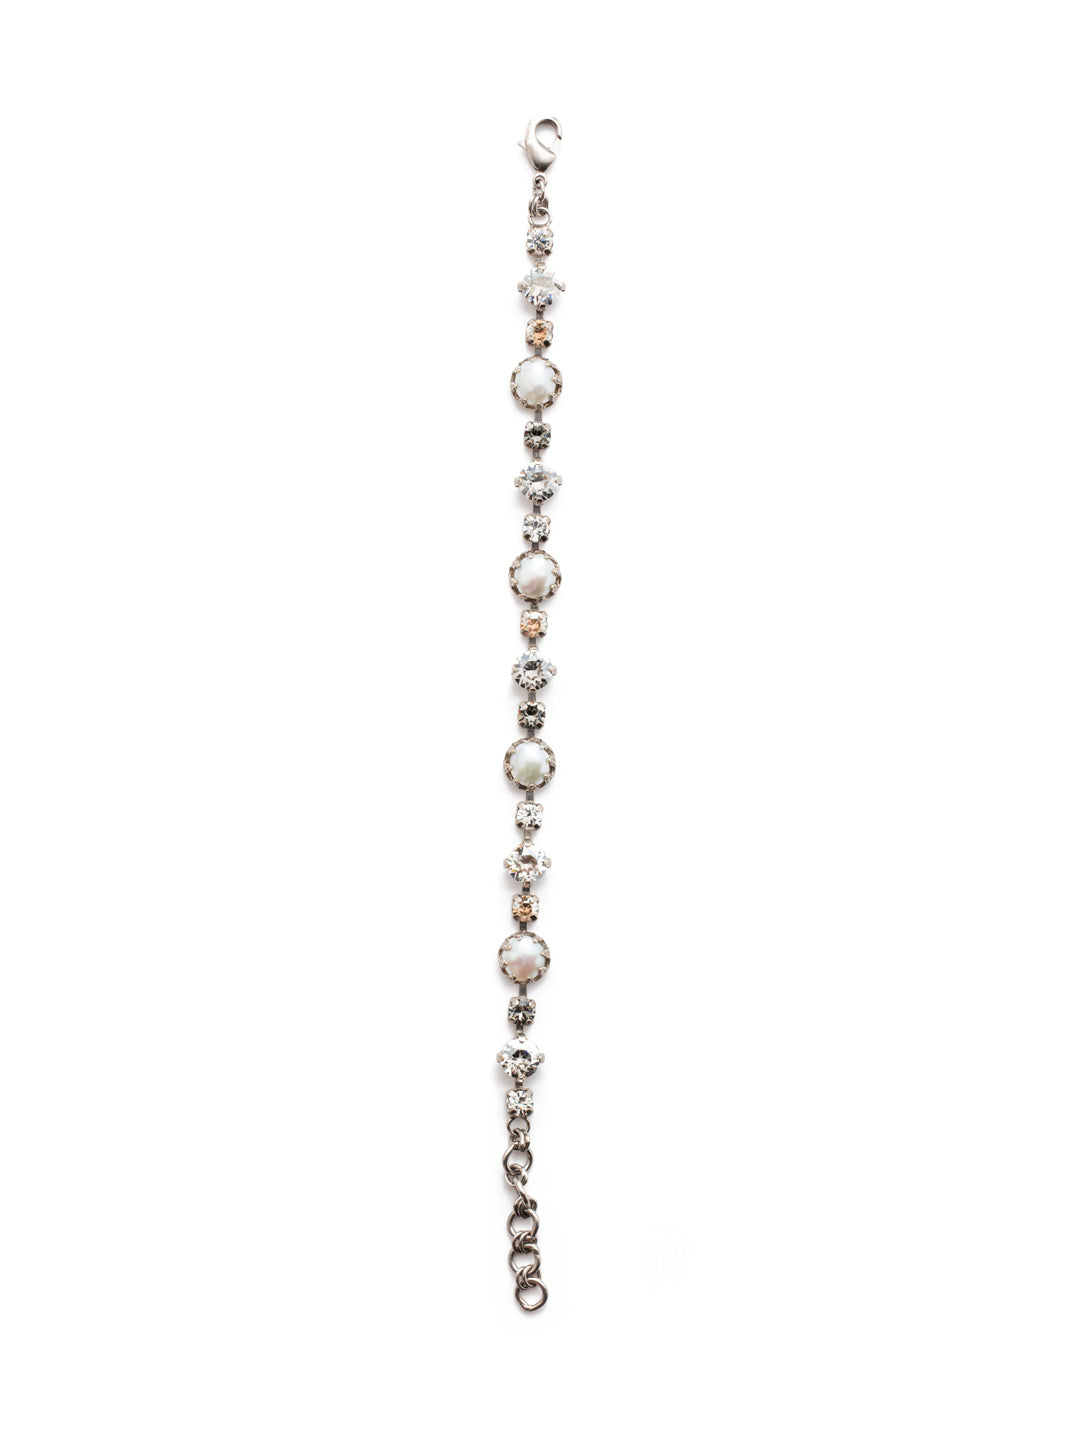 Emmanuella Tennis Bracelet - BES12ASGNS - Our Emmanuella Tennis Bracelet is proof positive that beautiful things can come in small packages. Fasten on this classic piece featuring sparkling crystals and freshwater pearls. From Sorrelli's Golden Shadow collection in our Antique Silver-tone finish.